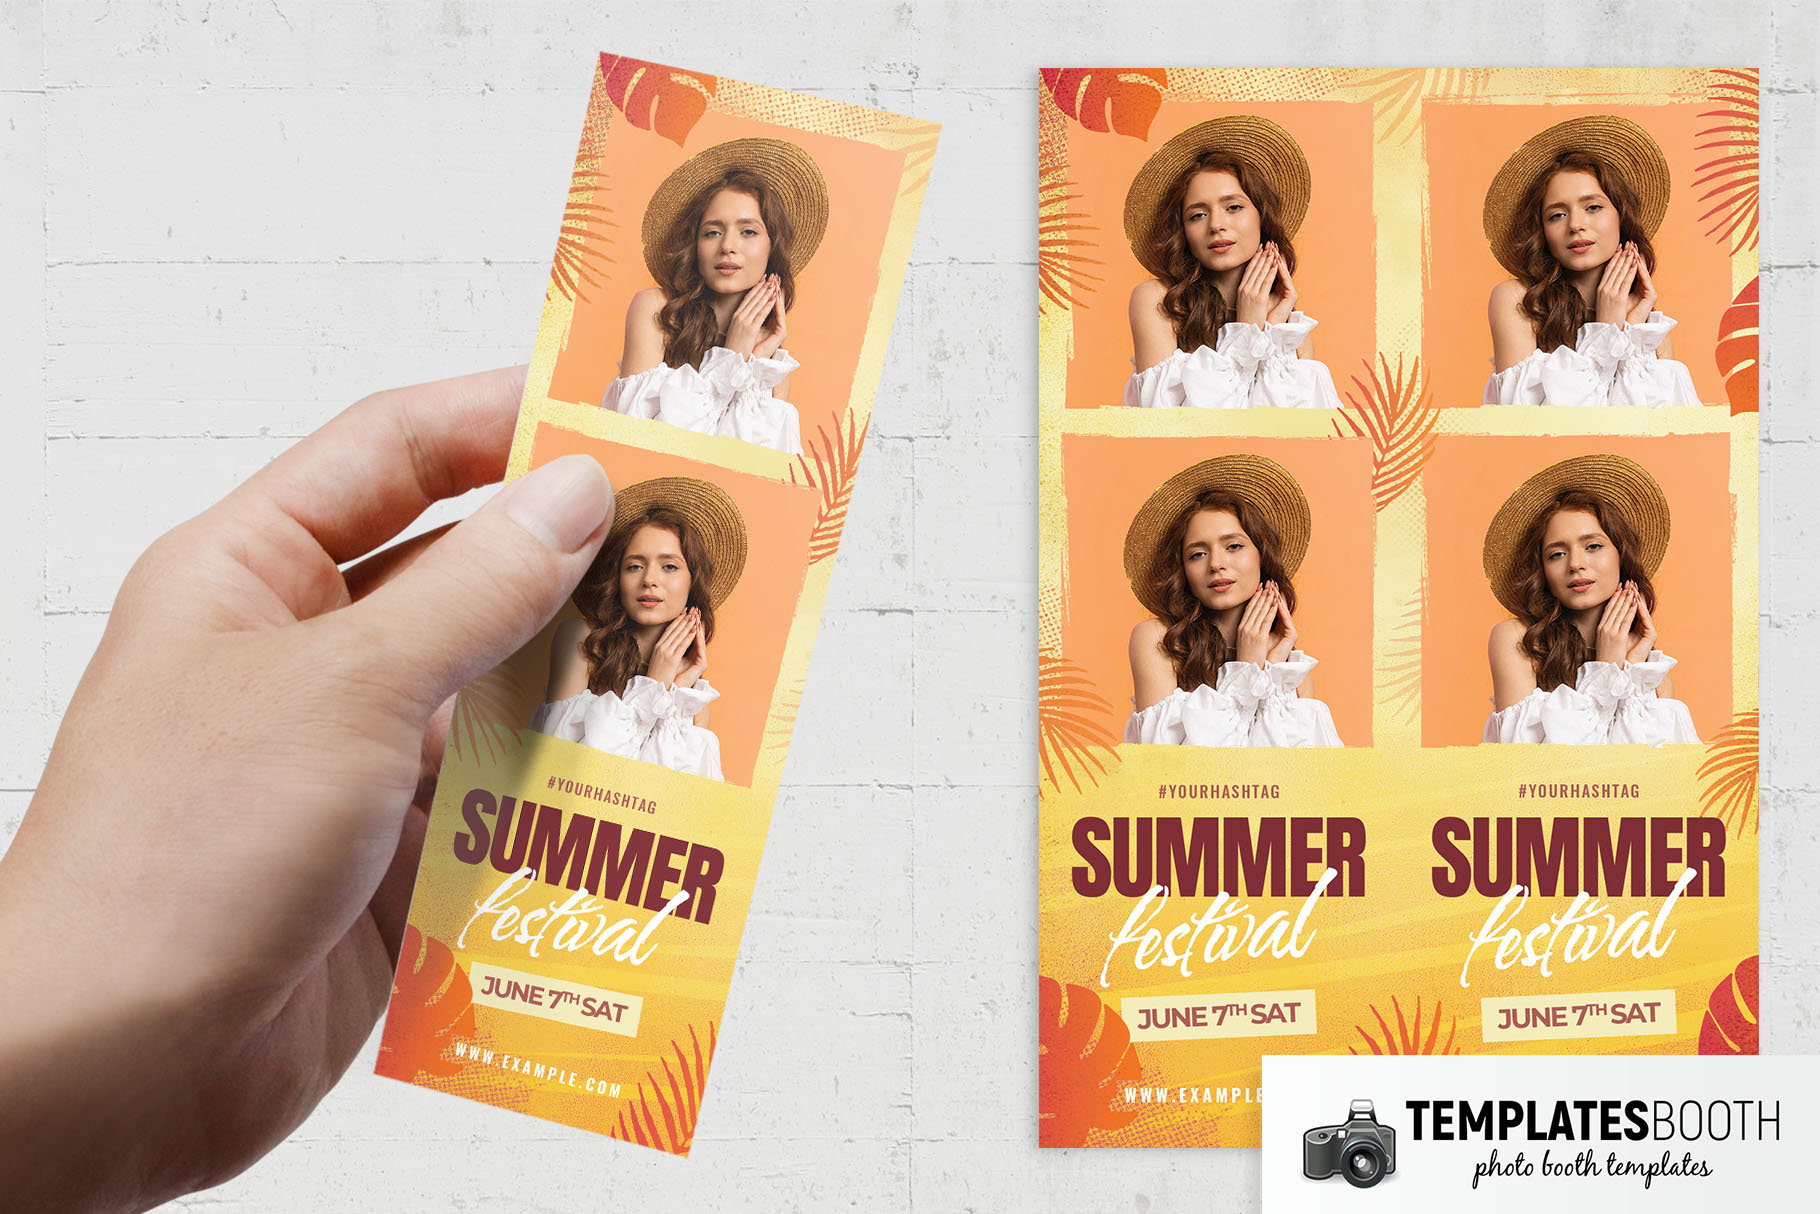 Summer Festival Photo Booth Template